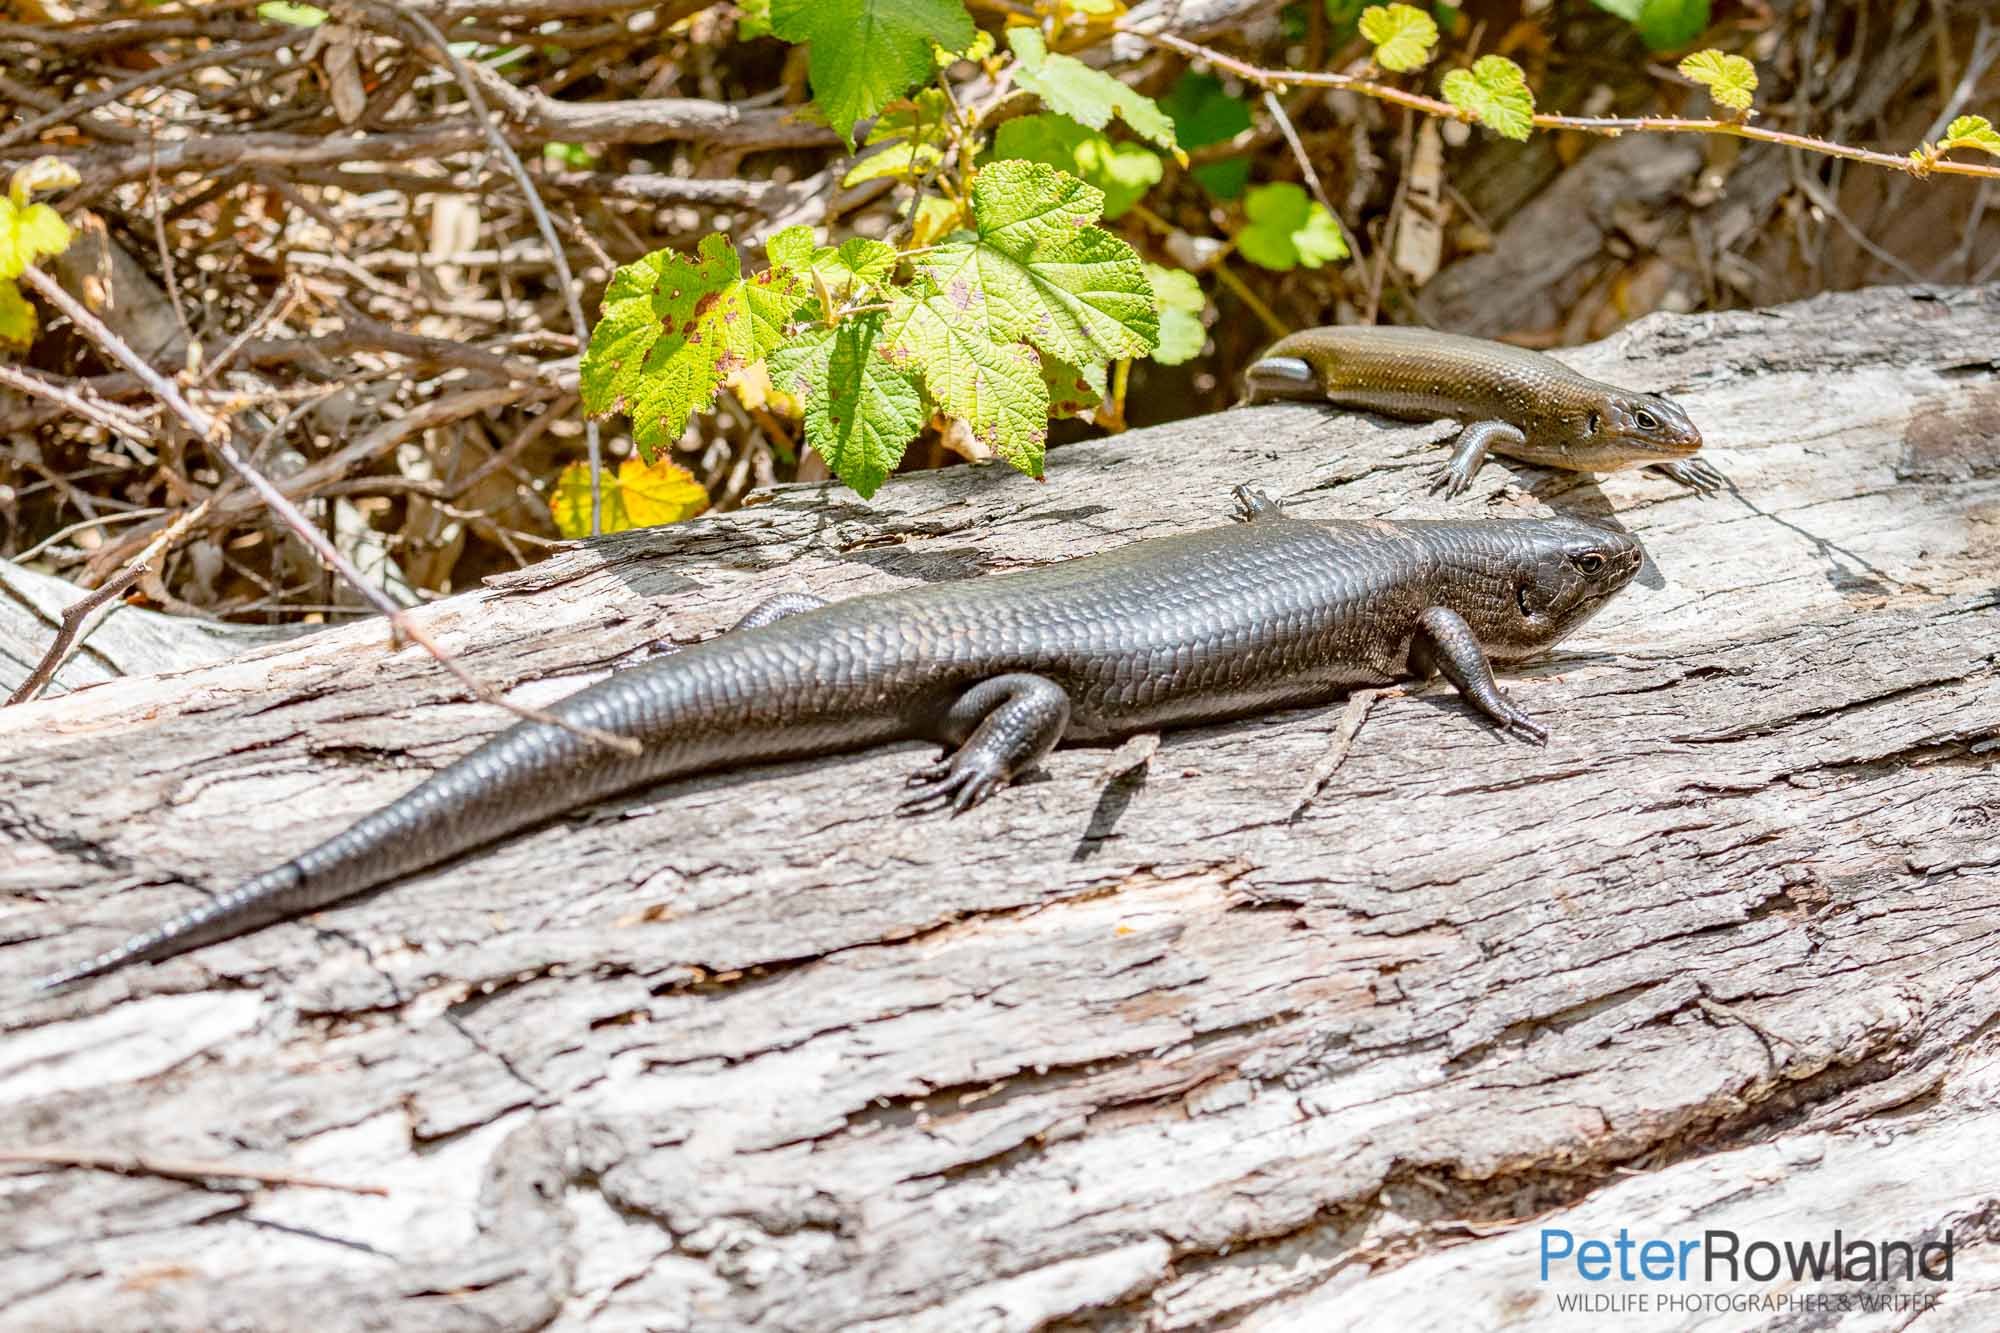 A mature and a young Land Mullet basking on a fallen log